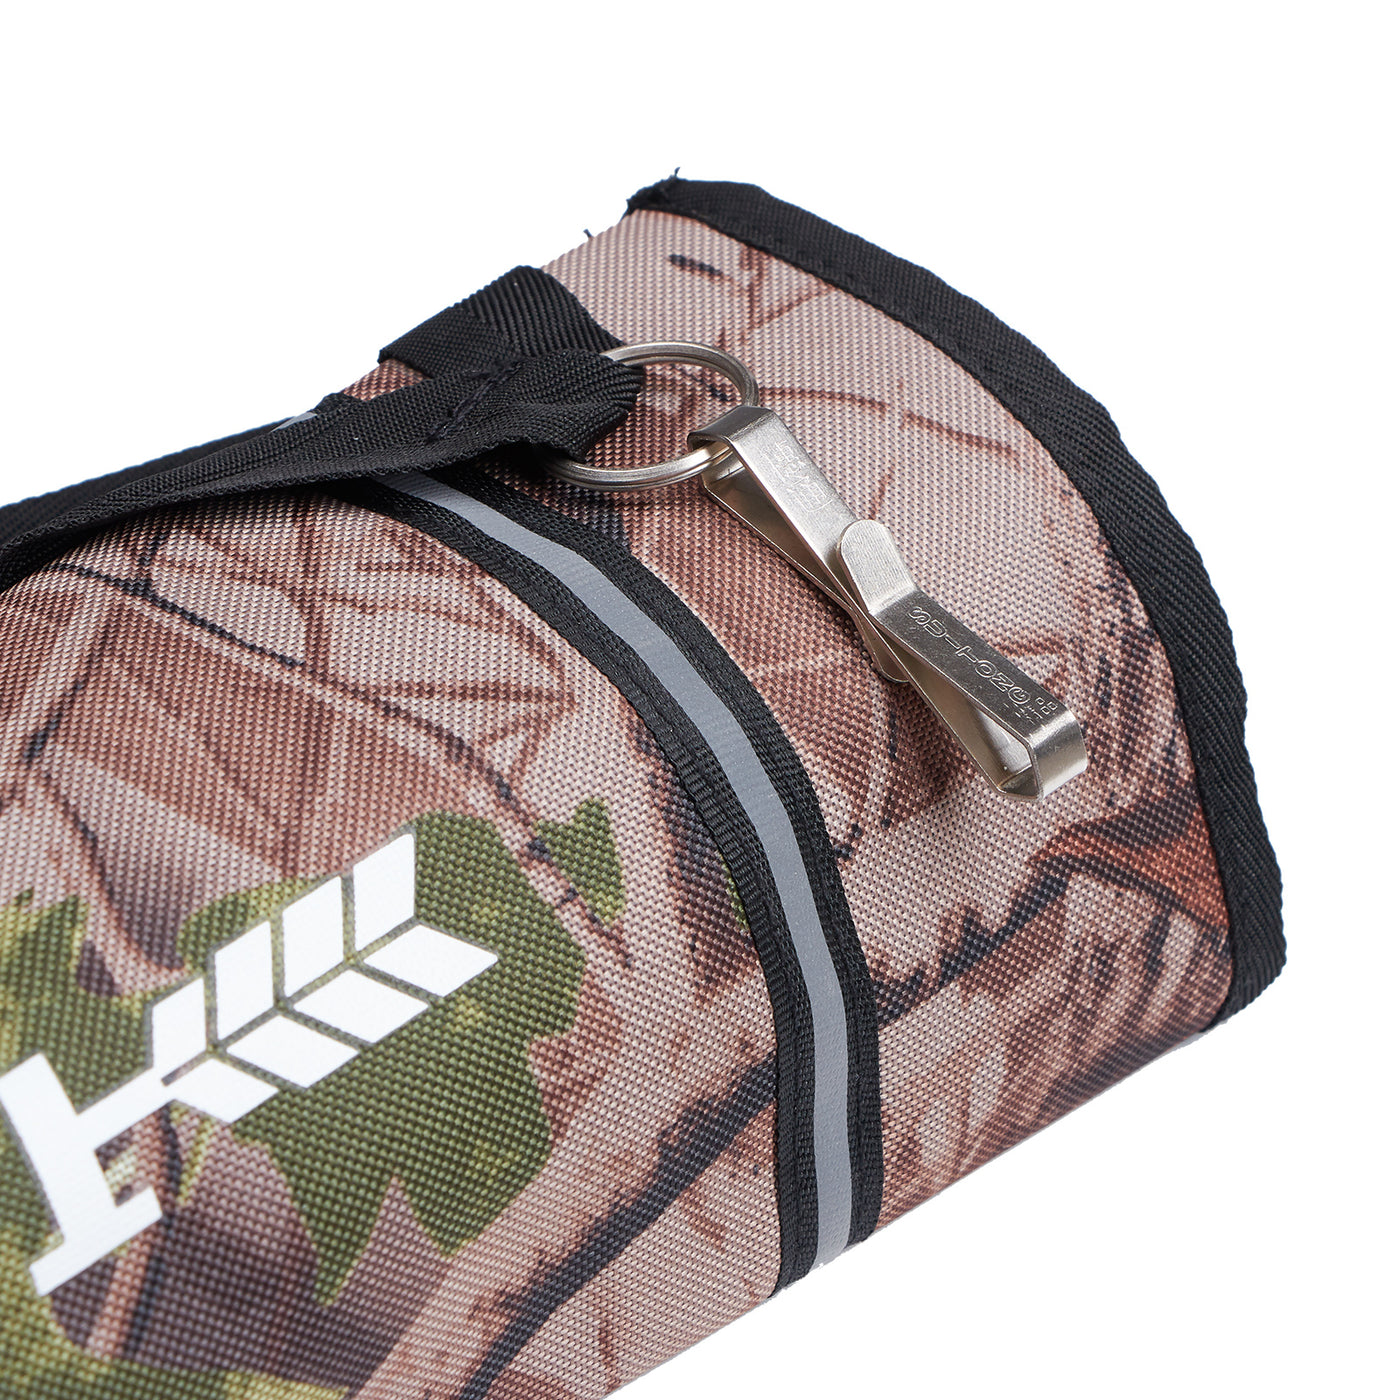 Camouflage 19" Kids Youth Body Back Waist Archery Arrow Quiver